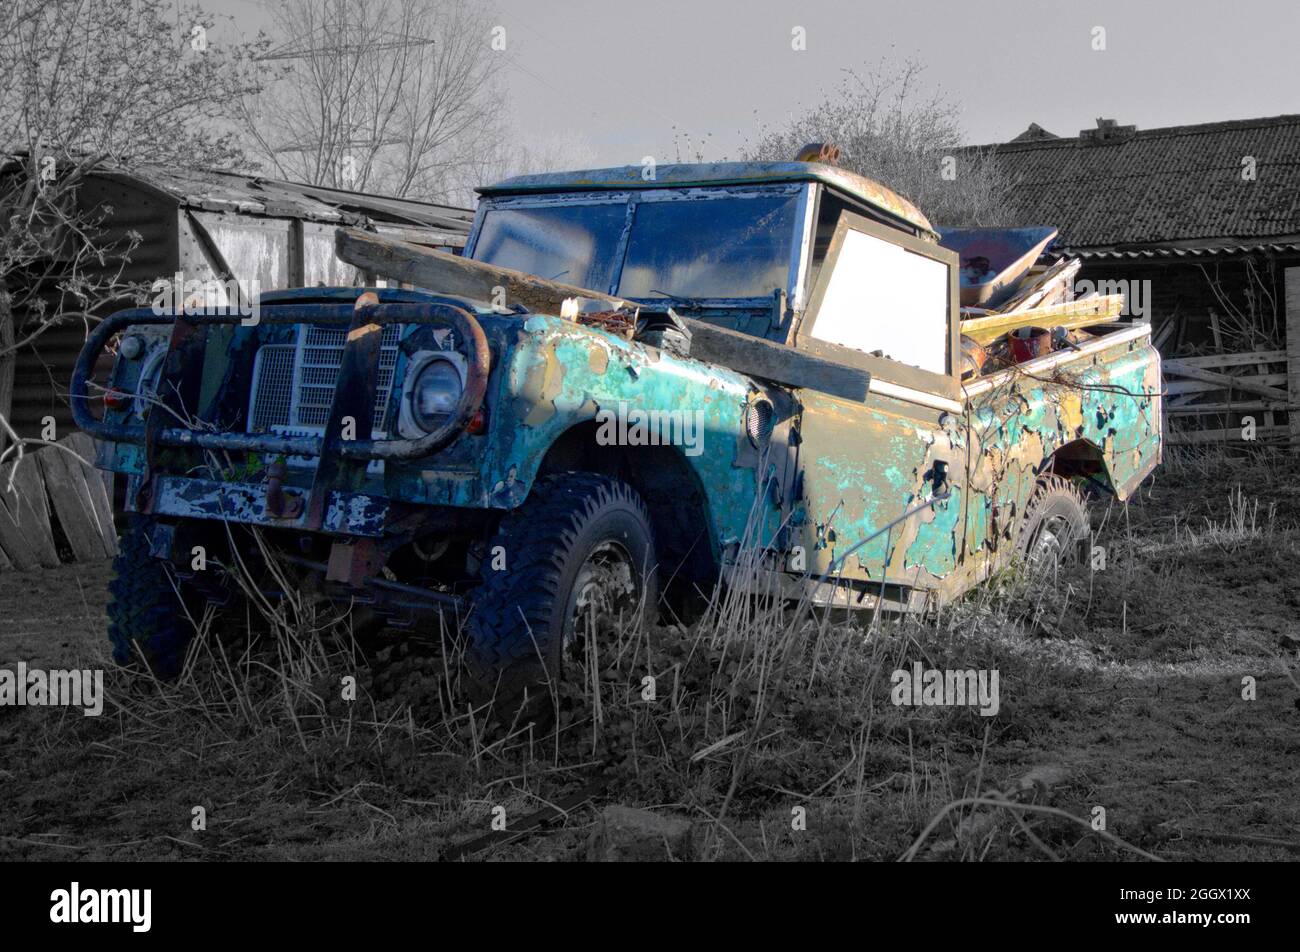 Abandoned land rover with broken chassis decays in a field. Stock Photo